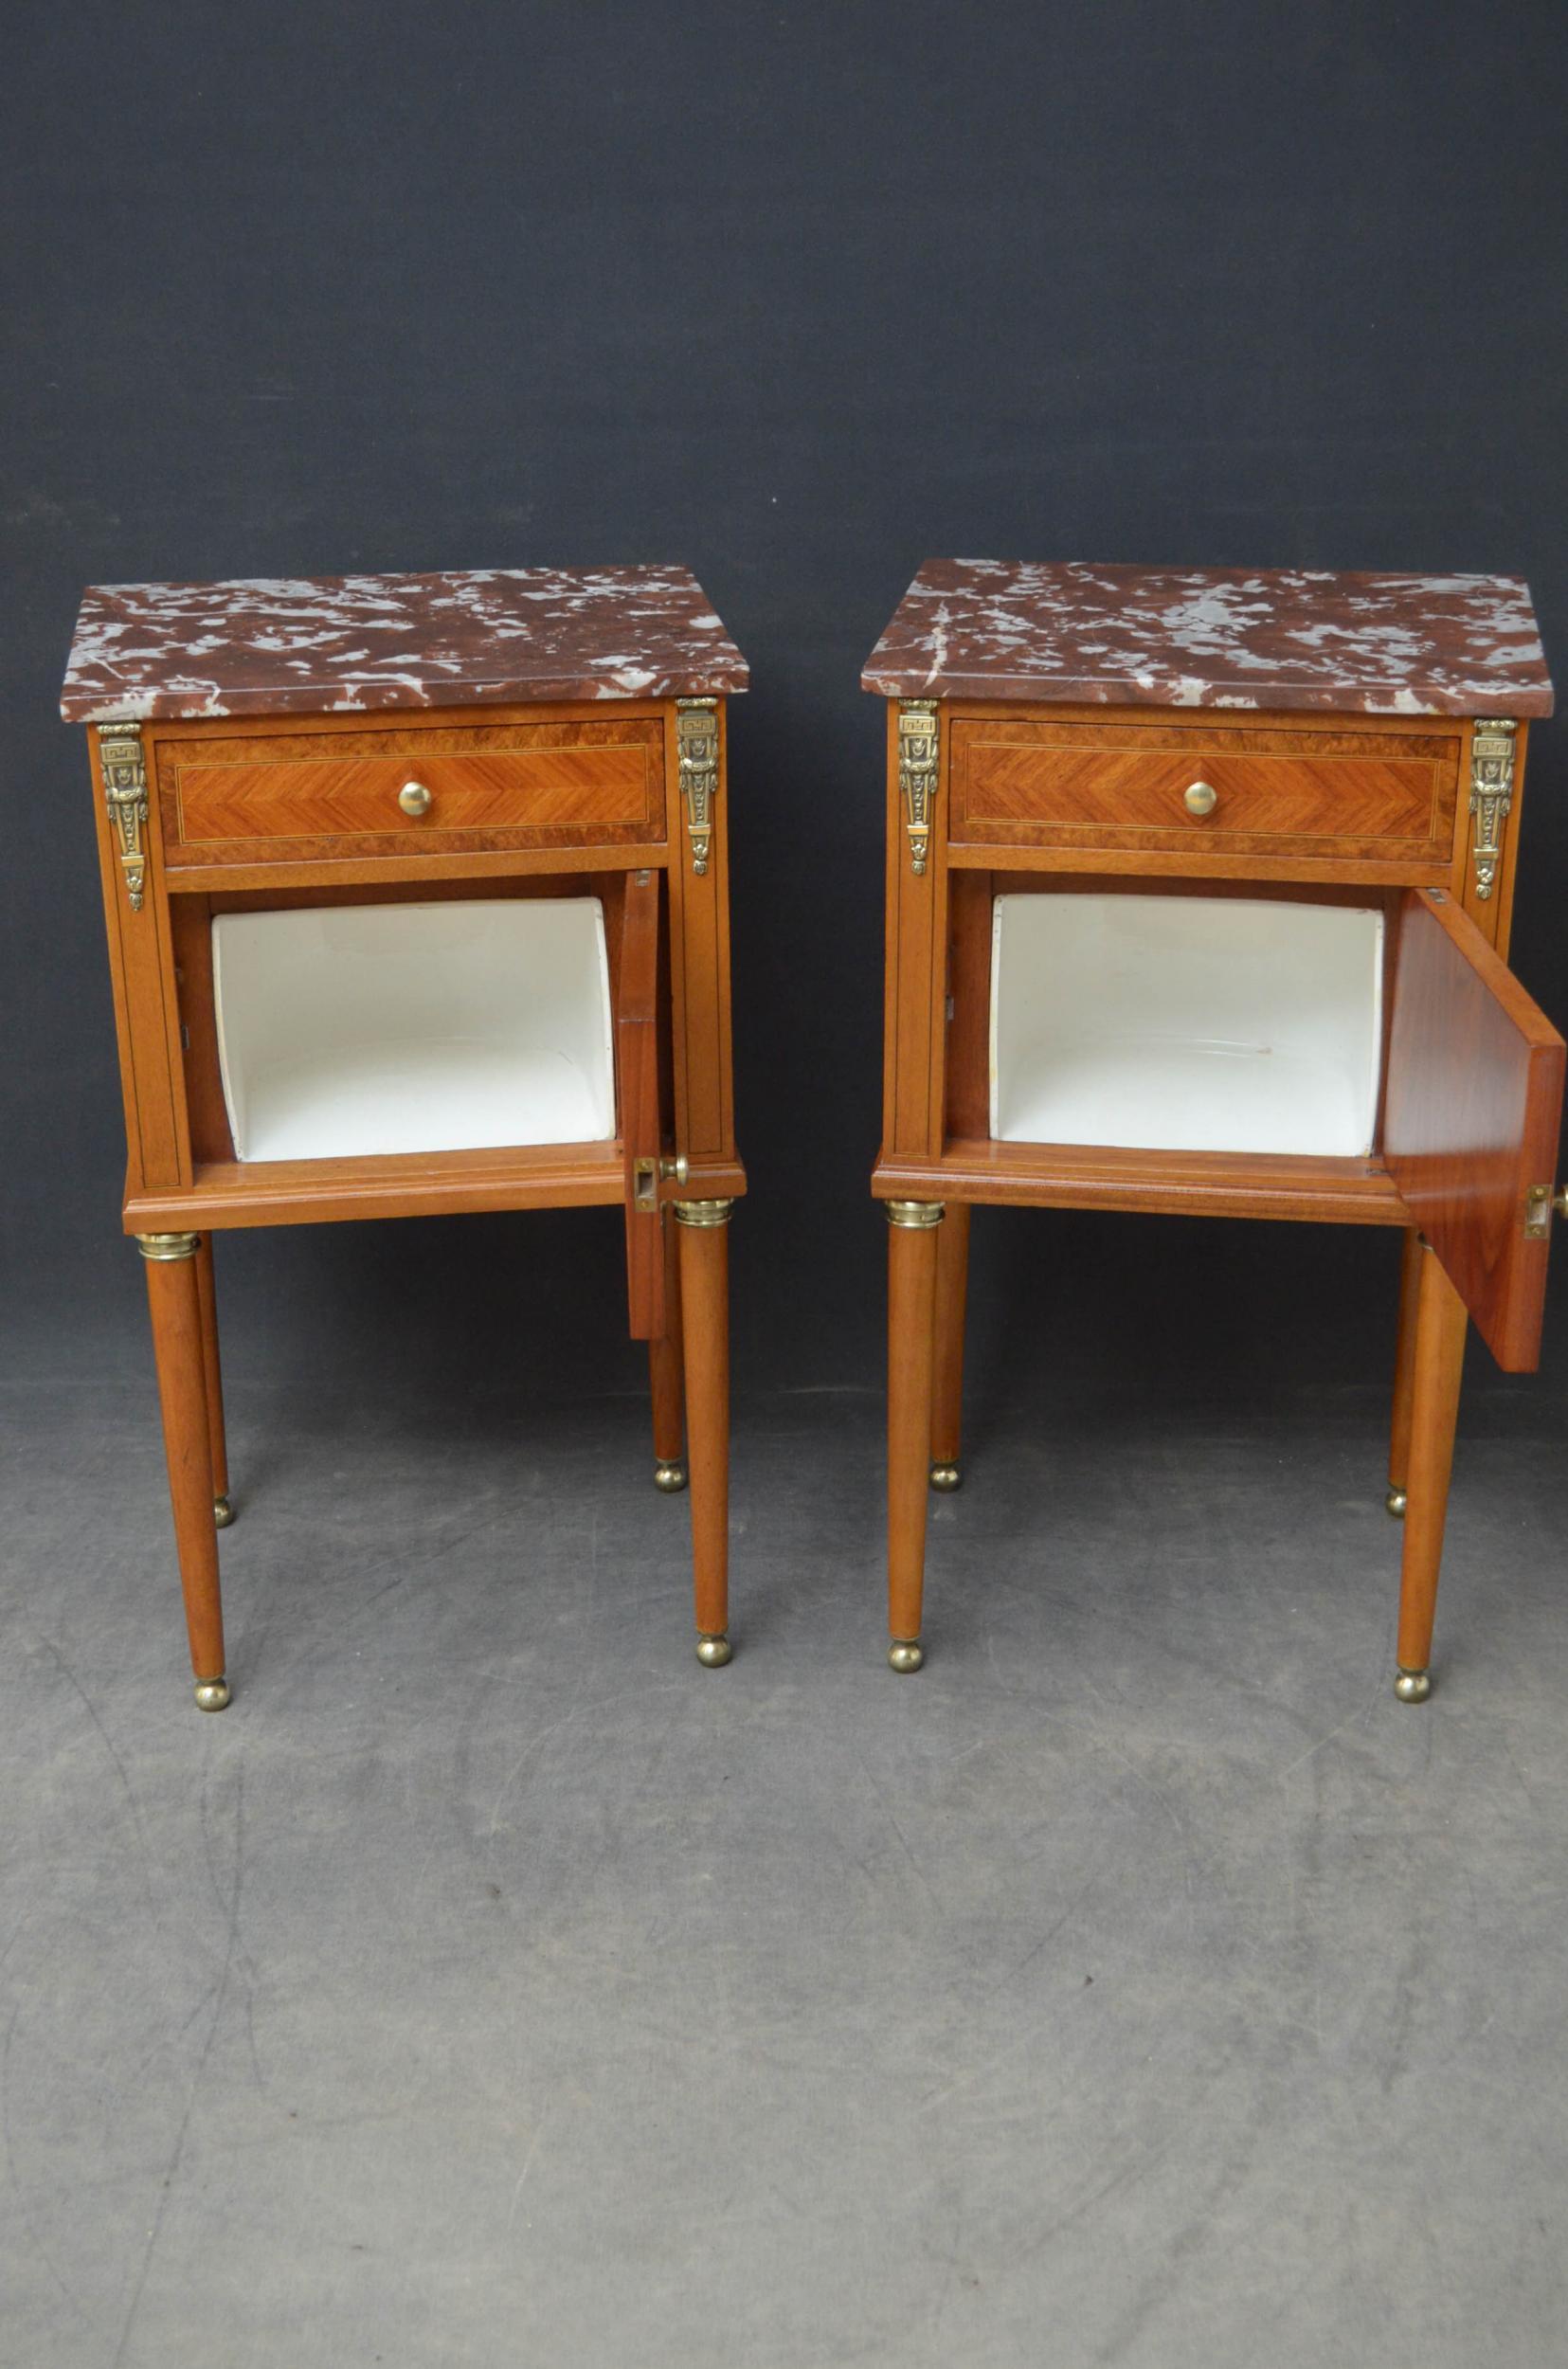 19th Century Pair of Bedside Cabinets